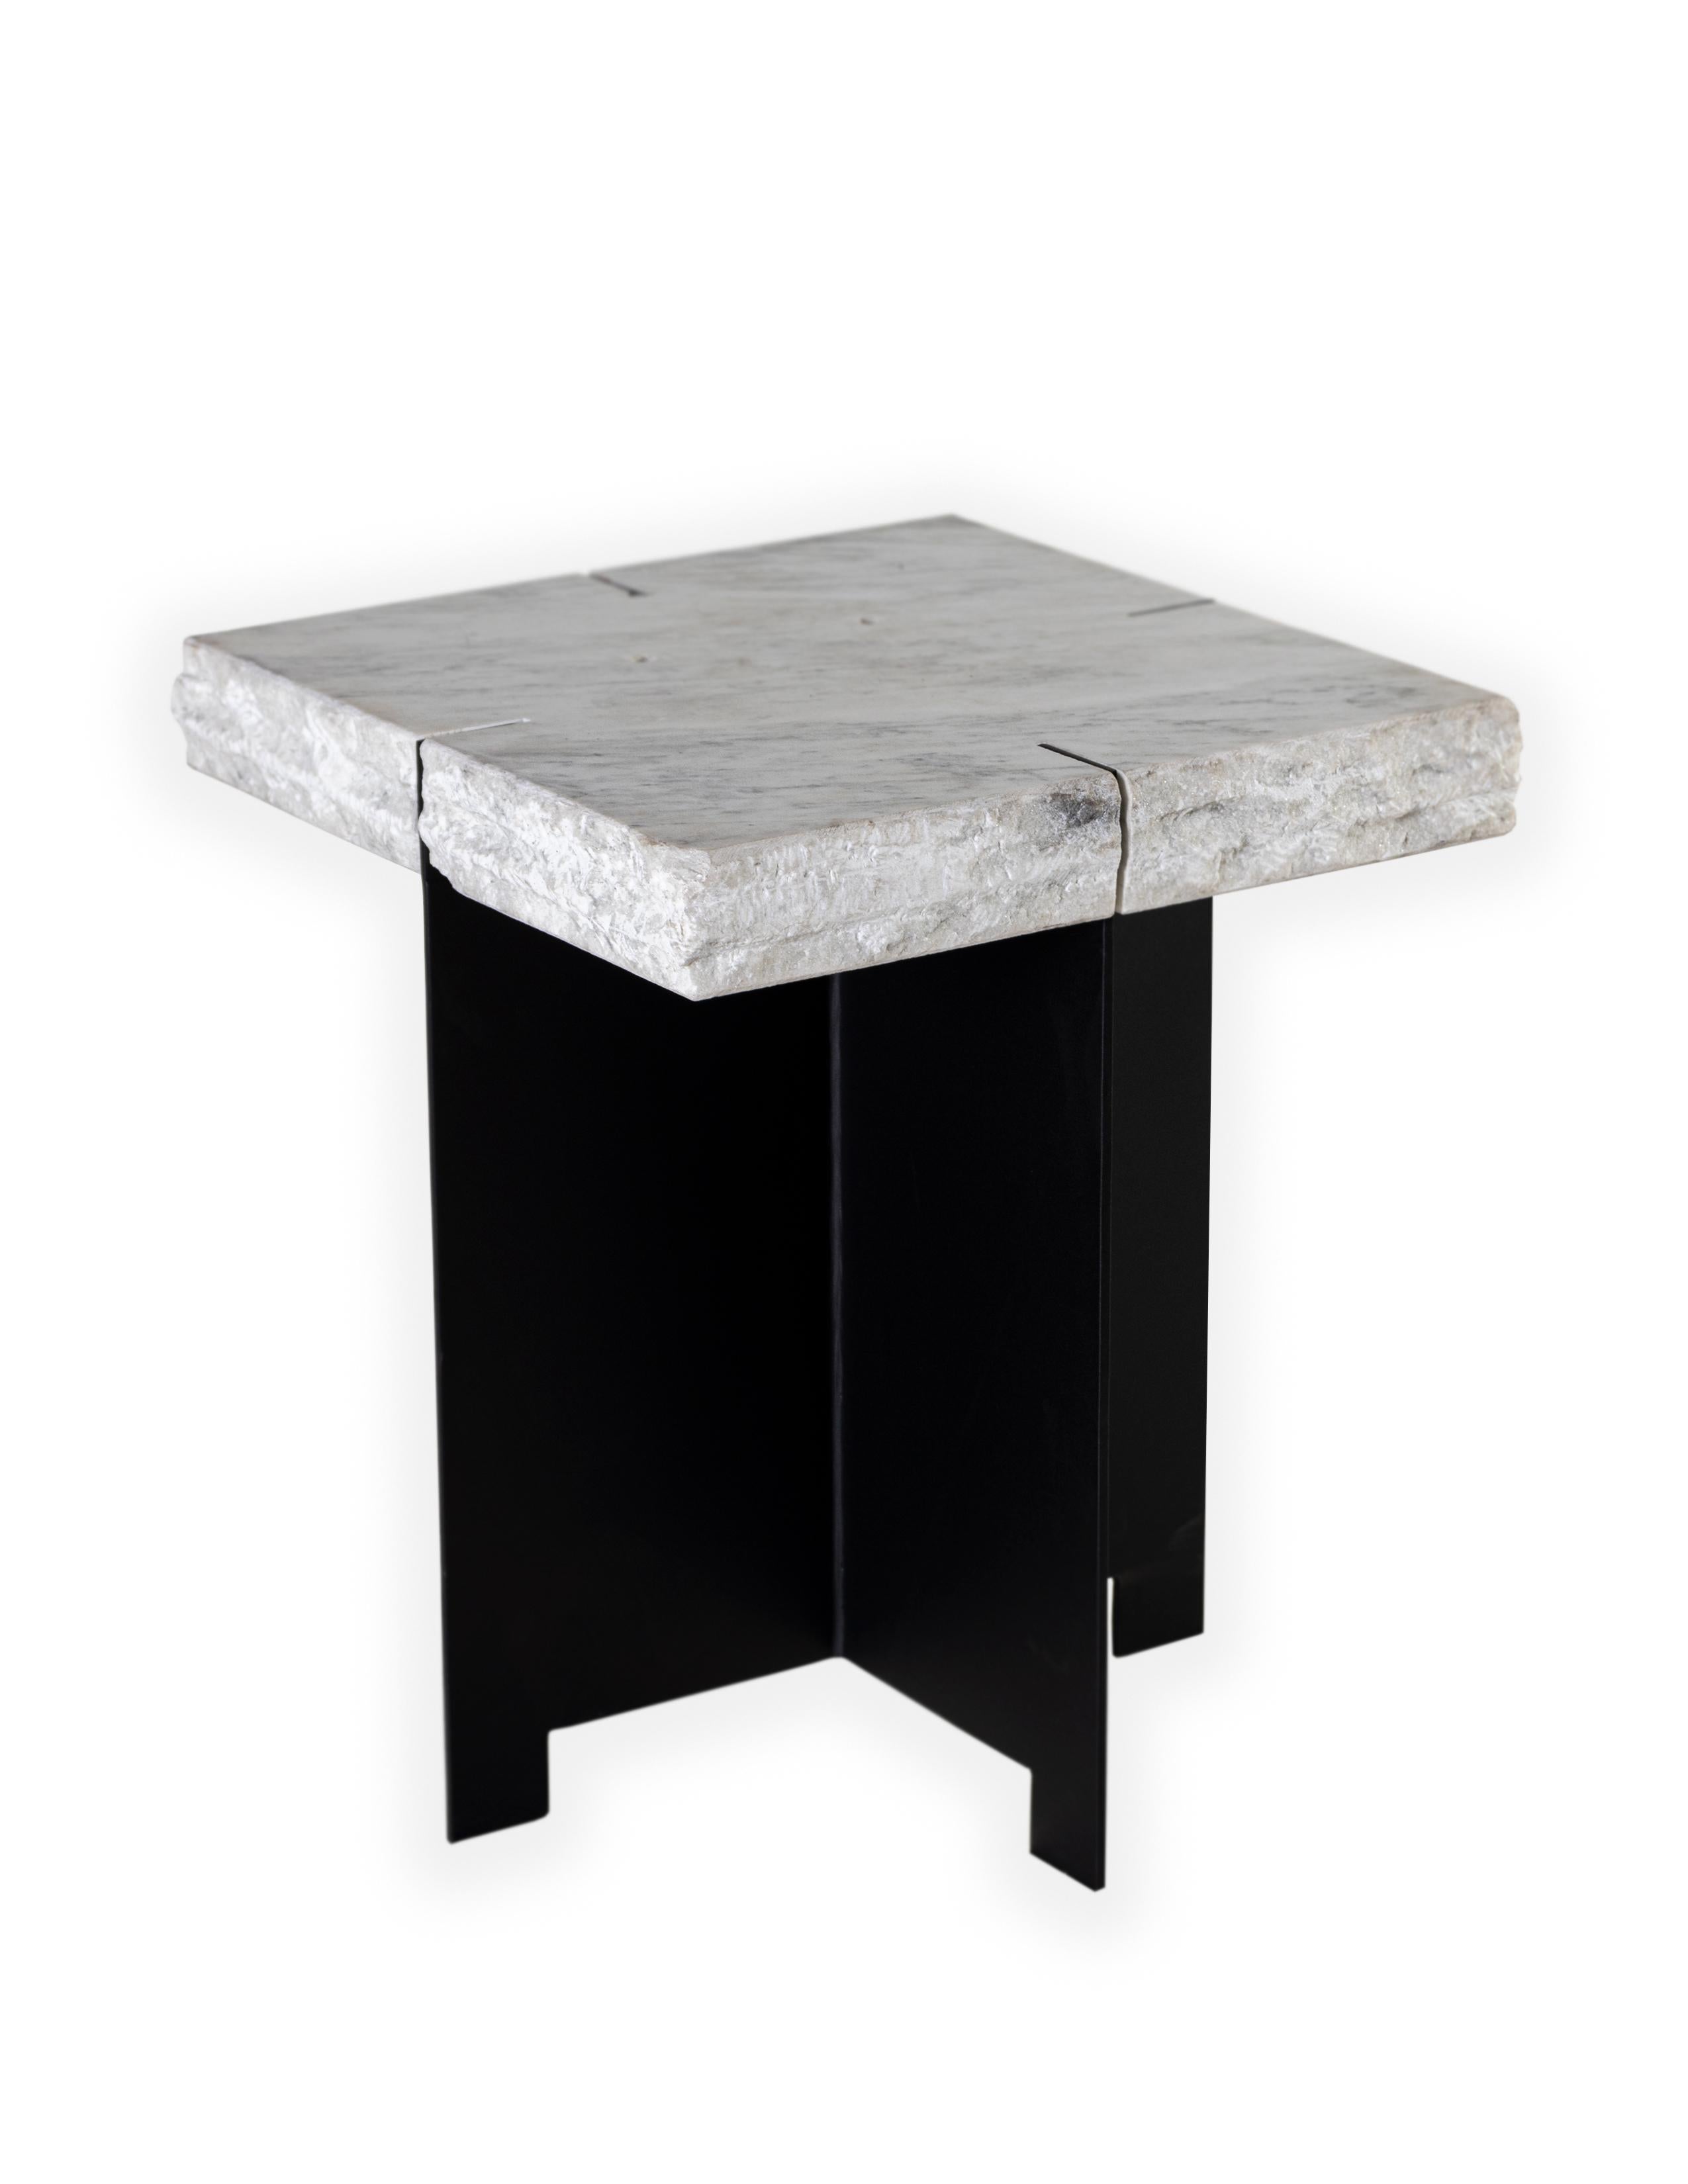 A side table comprised of a repurposed Carrara marble slab that rests on top of a blackened steel mount base.

This piece is suitable for outdoor use. 

A part of the Le Monde collection exclusive to Brendan Bass.